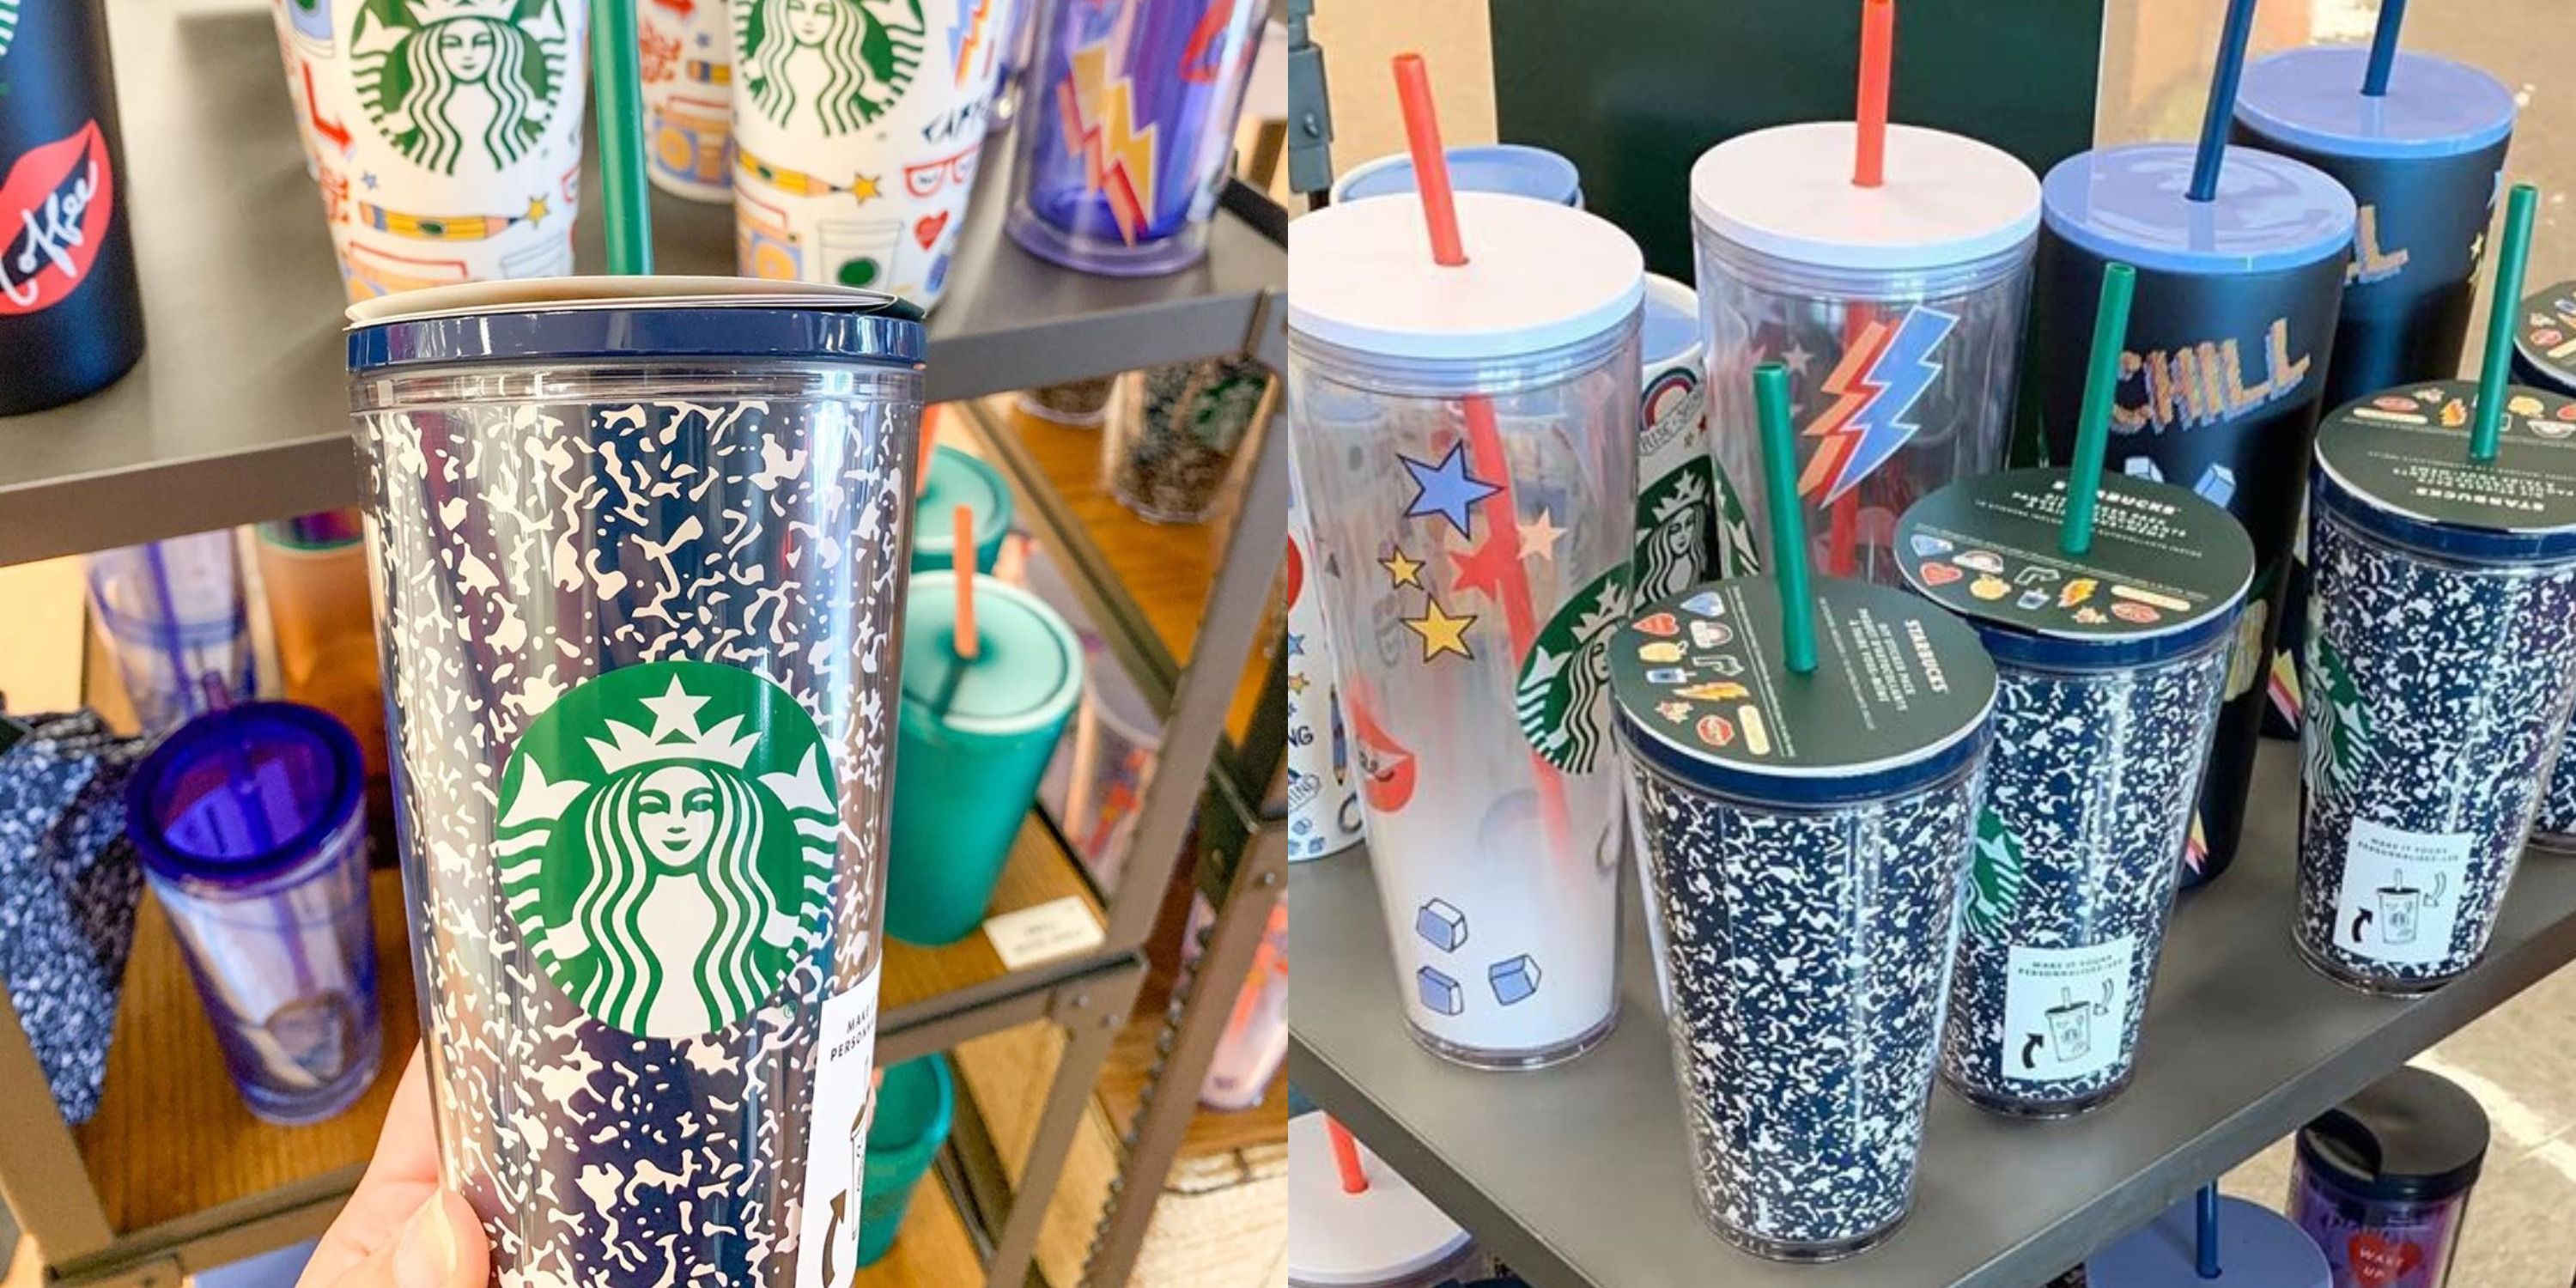 Starbucks' notebook tumbler with pencil straw is the perfect end